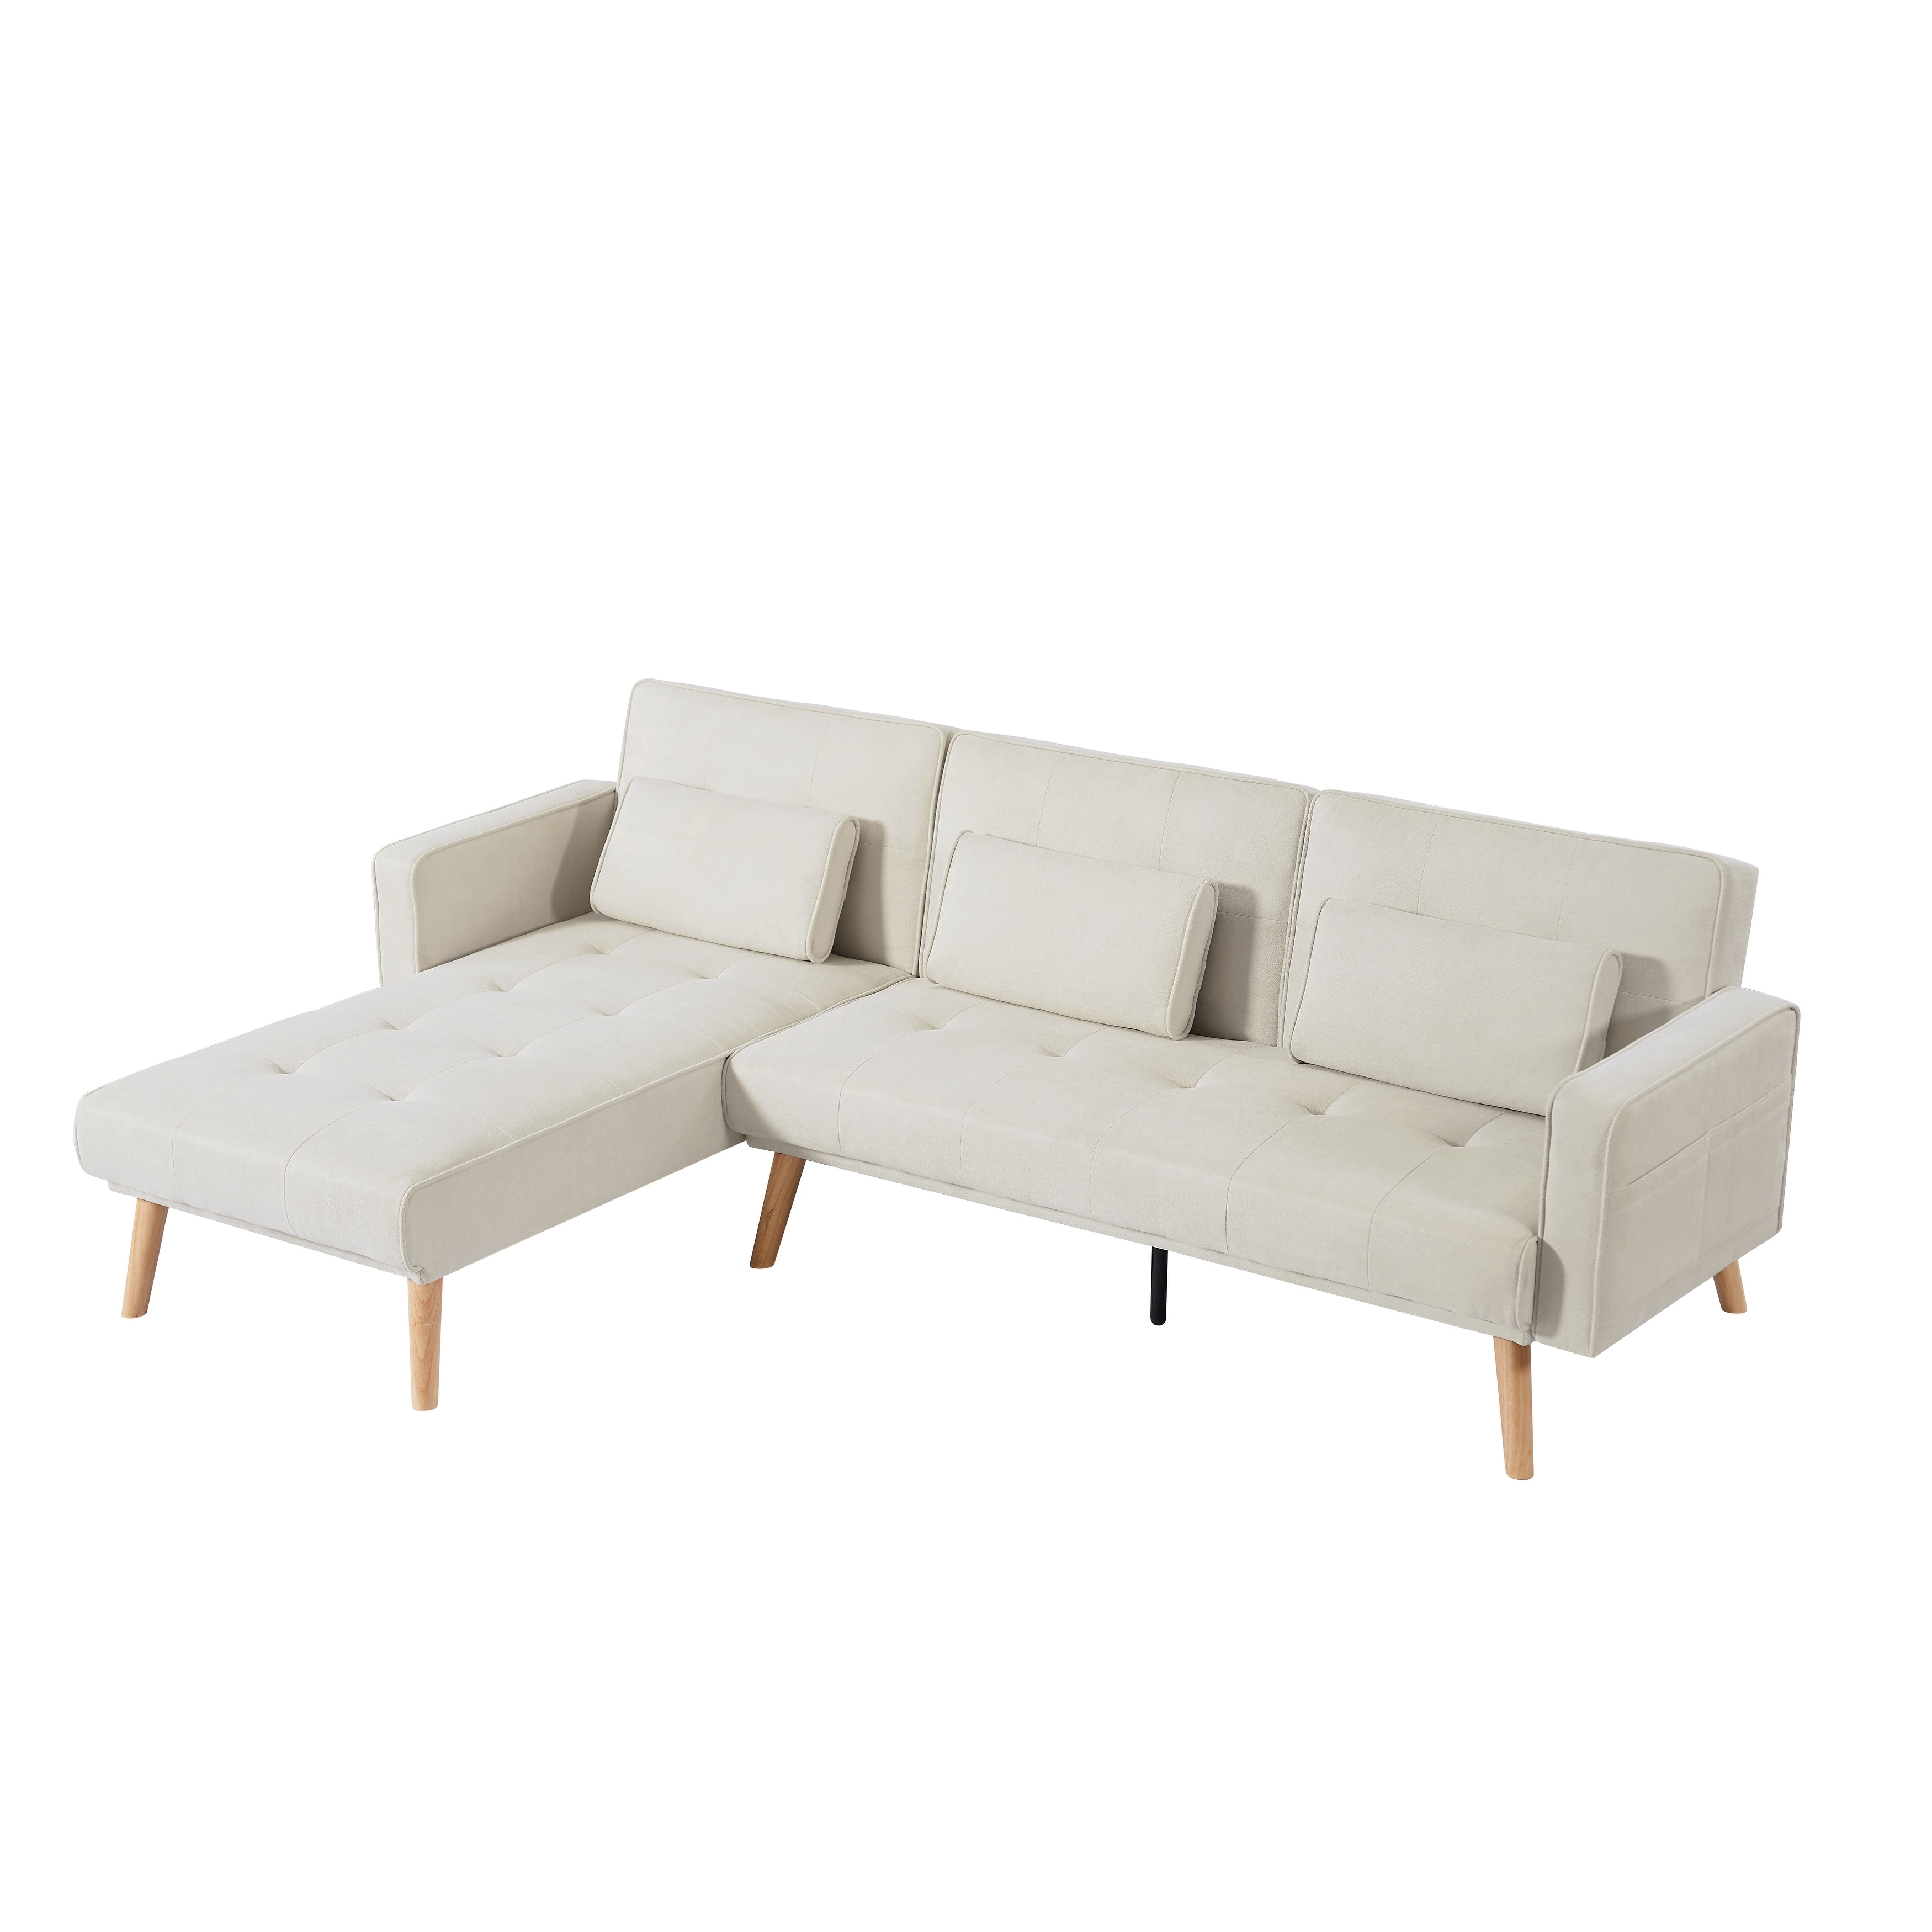 https://ak1.ostkcdn.com/images/products/is/images/direct/ddd7a83eabce73062df9f2ced1e66cf7e4e7f5f8/L-shaped-Couch-Set-Linen-Convertible-Sectional-Sofa-w--Lumbar-Pillow%2C-Ivory.jpg